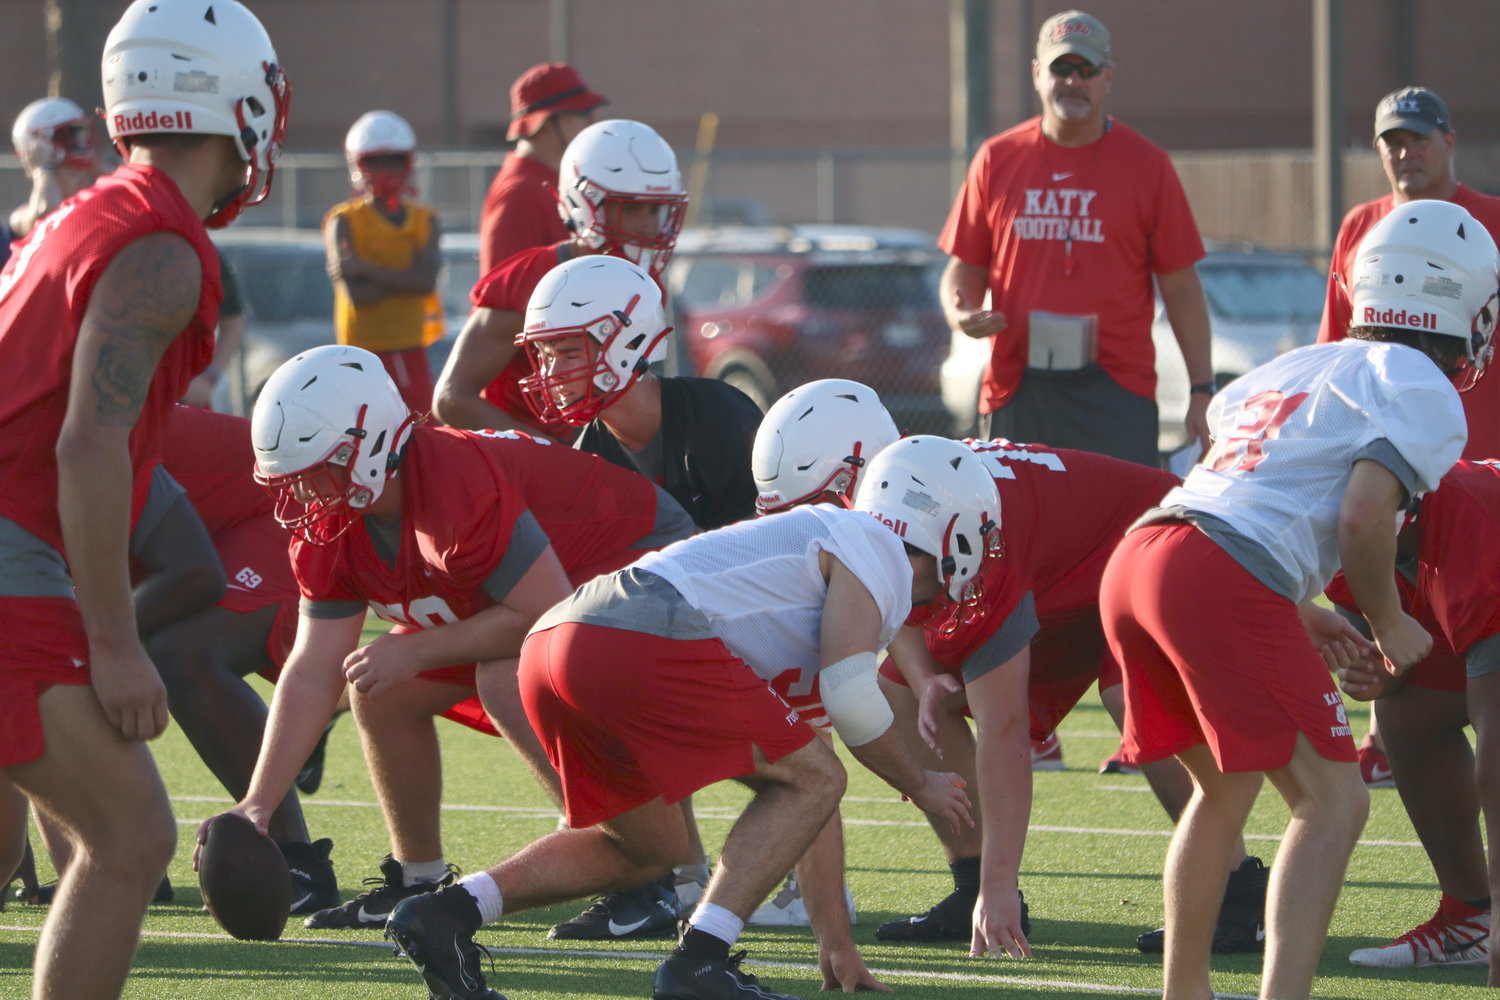 Katy High's offense lines up to run a play during Monday's practice at Tiger Stadium.